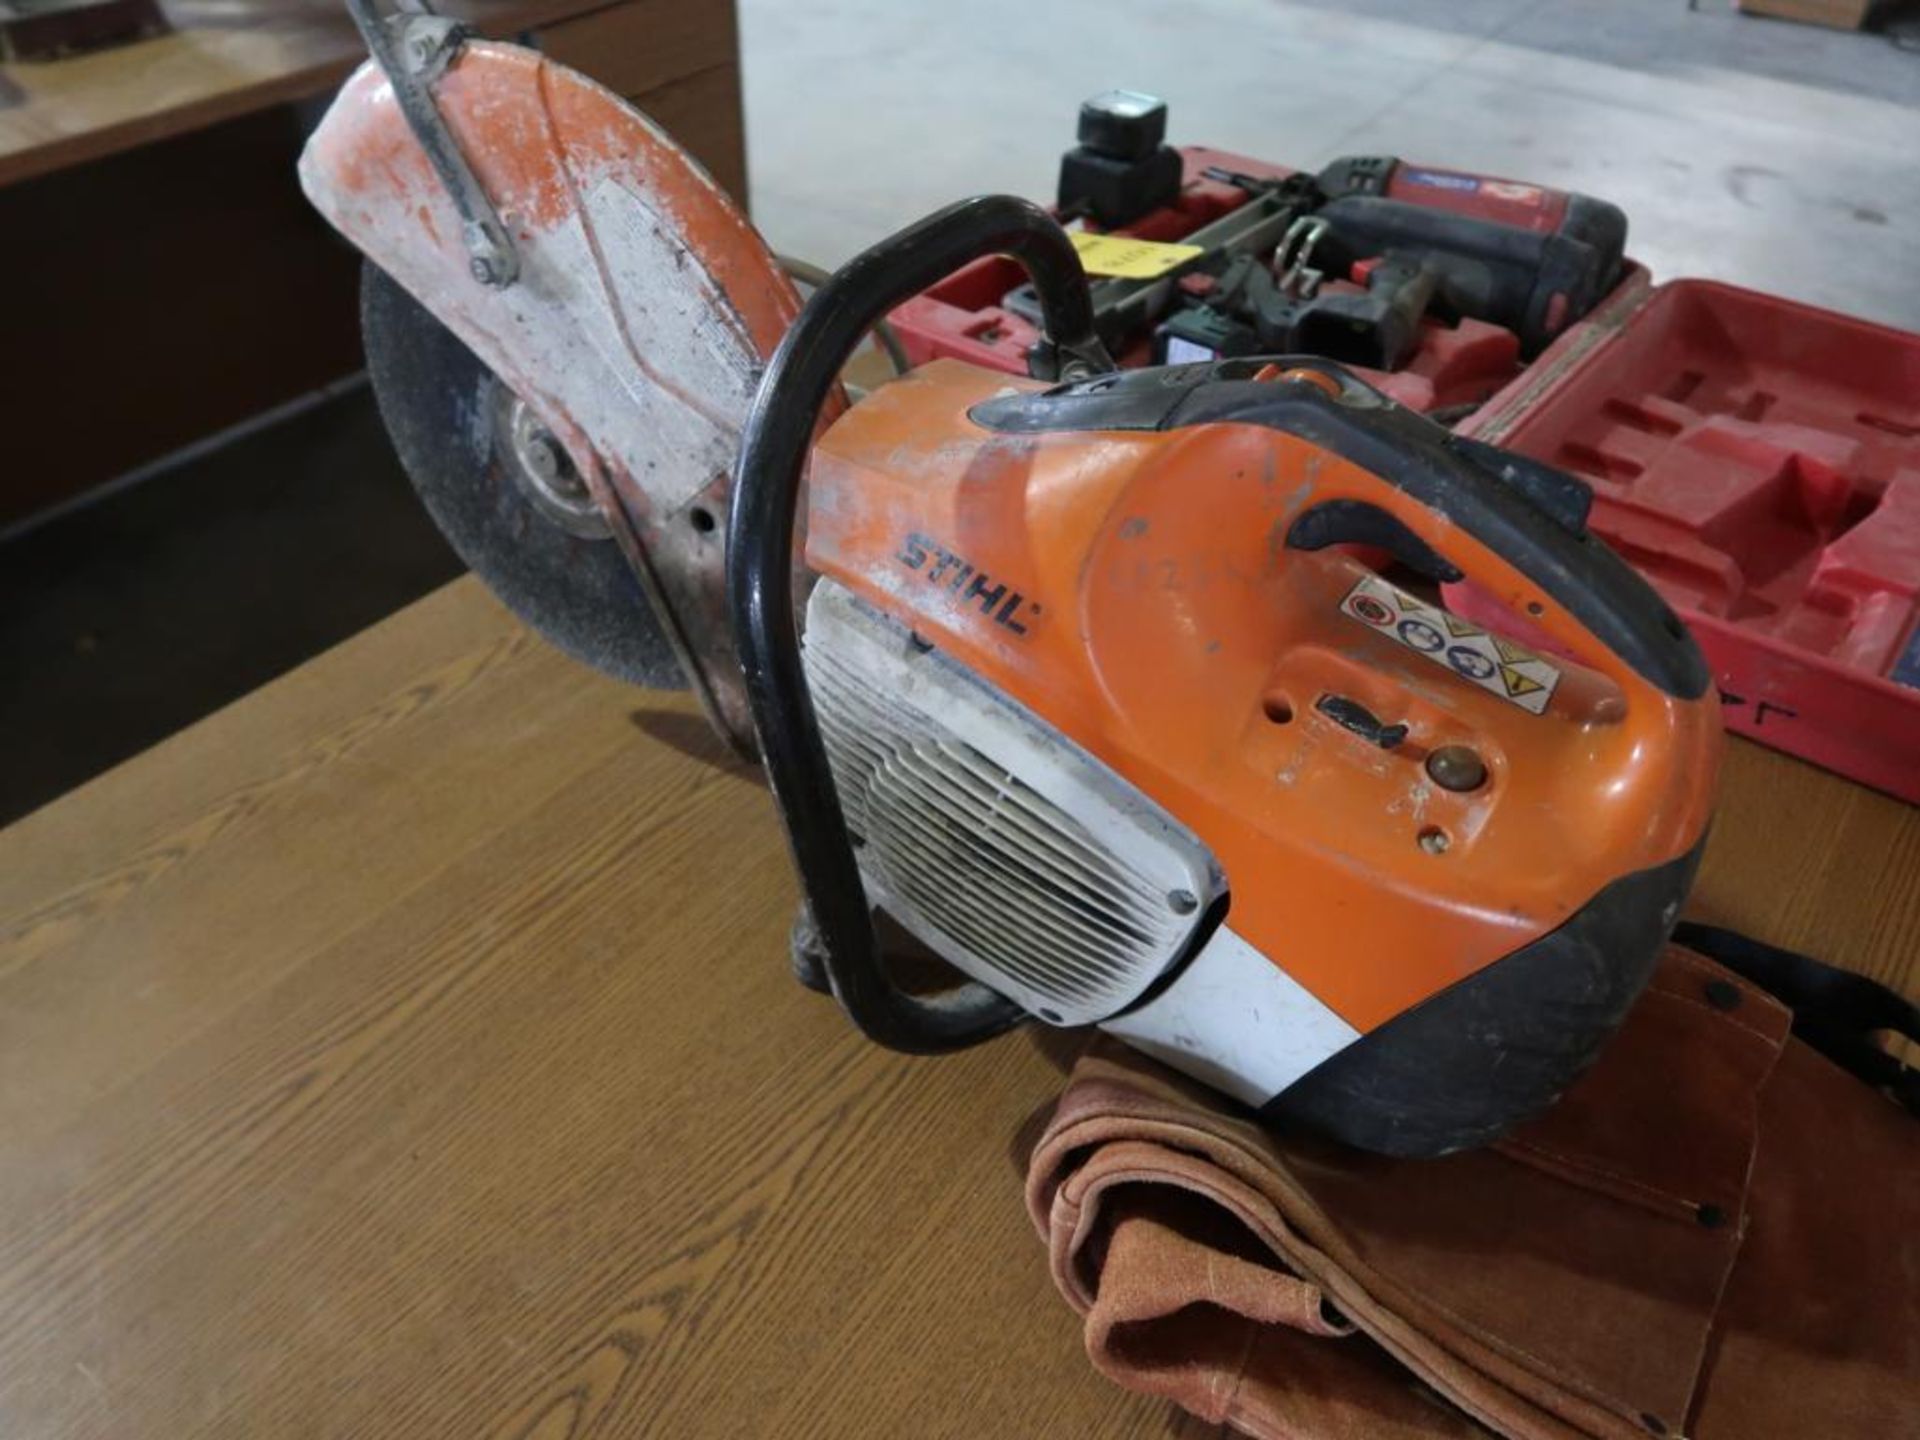 Stihl Gas Powered Chop Saw Model TS420, including Chaps - Image 2 of 2